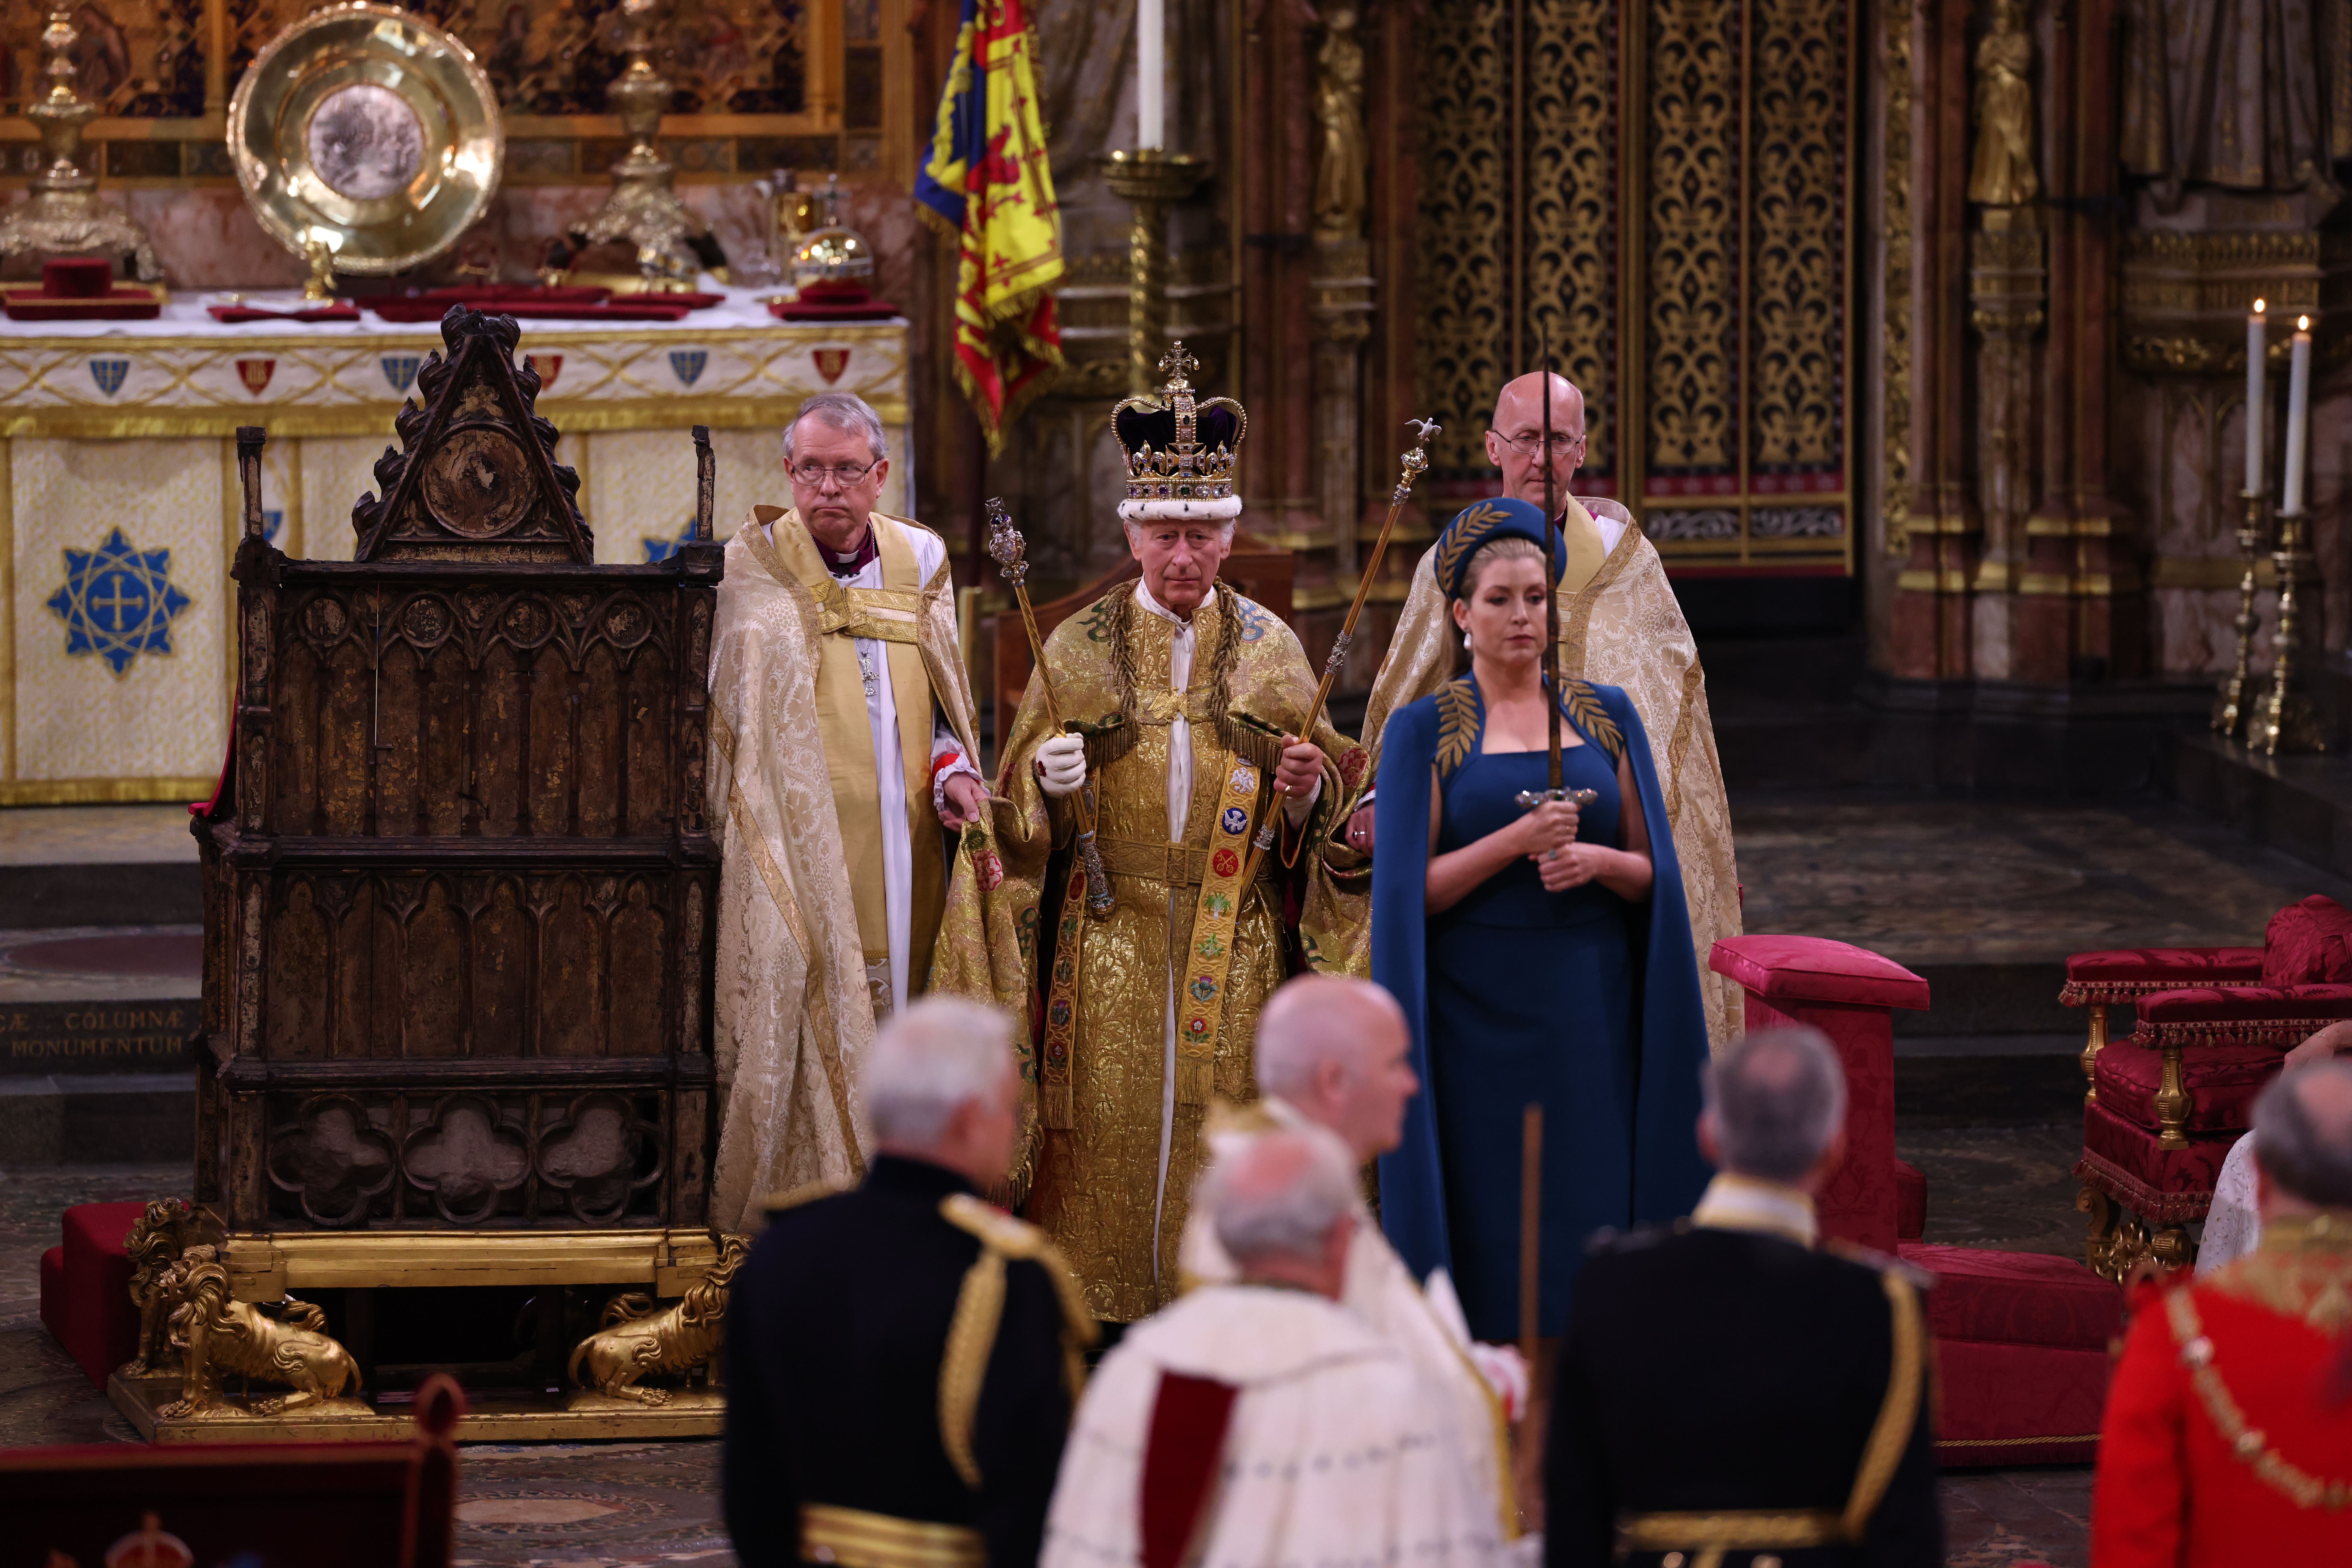 The King with Lord President of the Council, Penny Mordaunt, carrying the Sword of State, during his coronation at Westminster Abbey (Richard Pohle/The Times/PA)